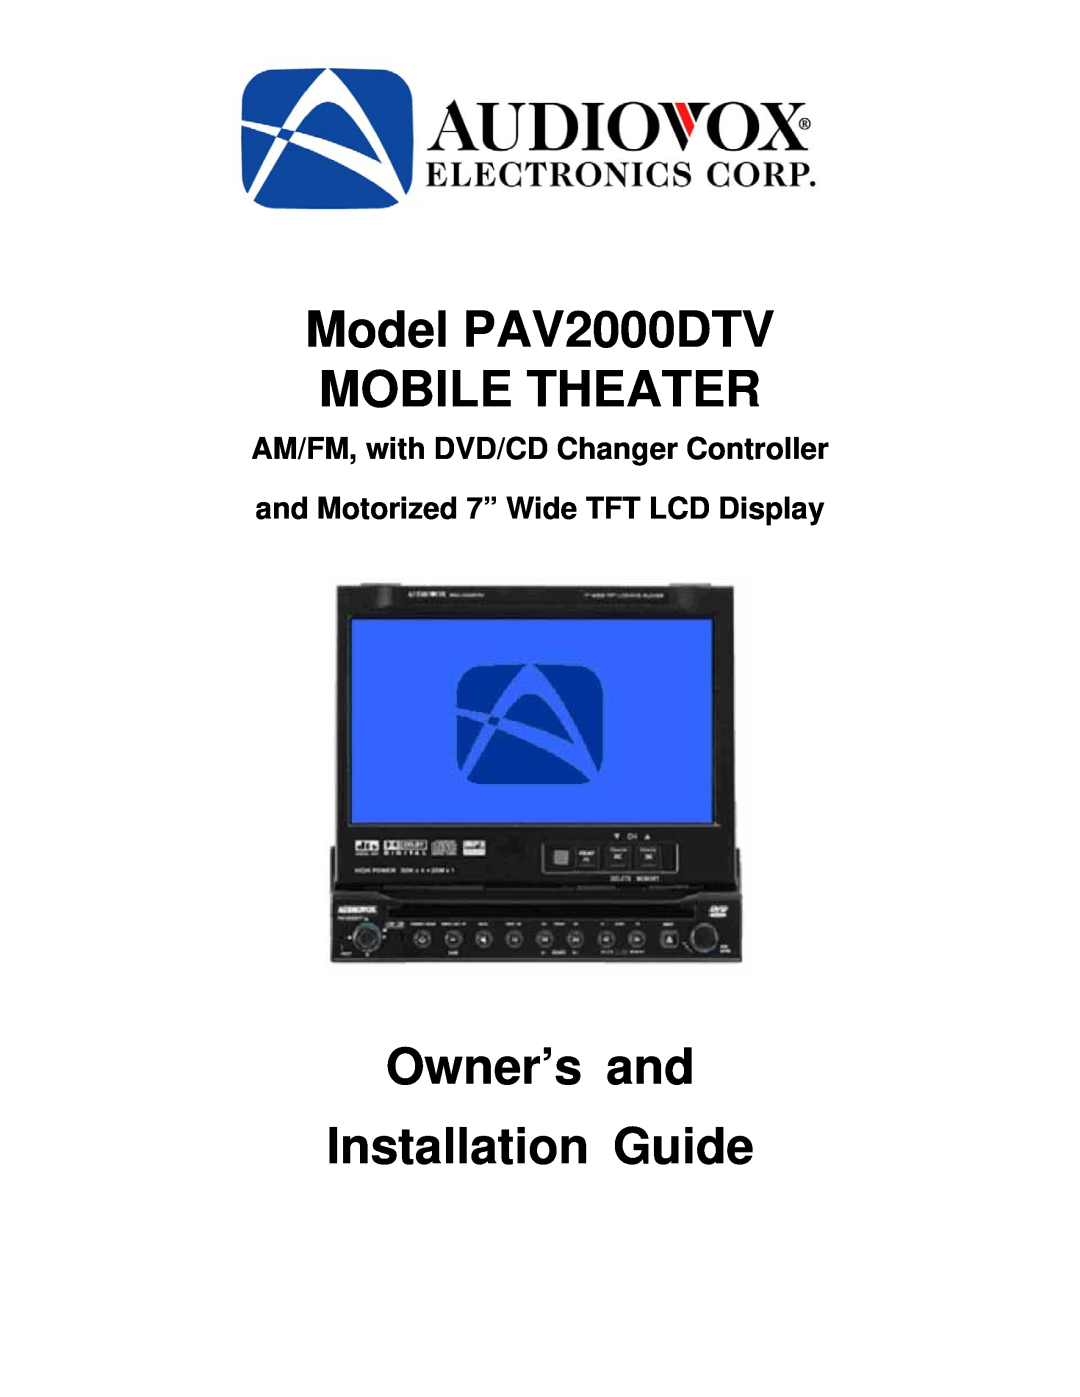 Audiovox manual Model PAV2000DTV MOBILE THEATER, Owner’s and Installation Guide, AM/FM, with DVD/CD Changer Controller 